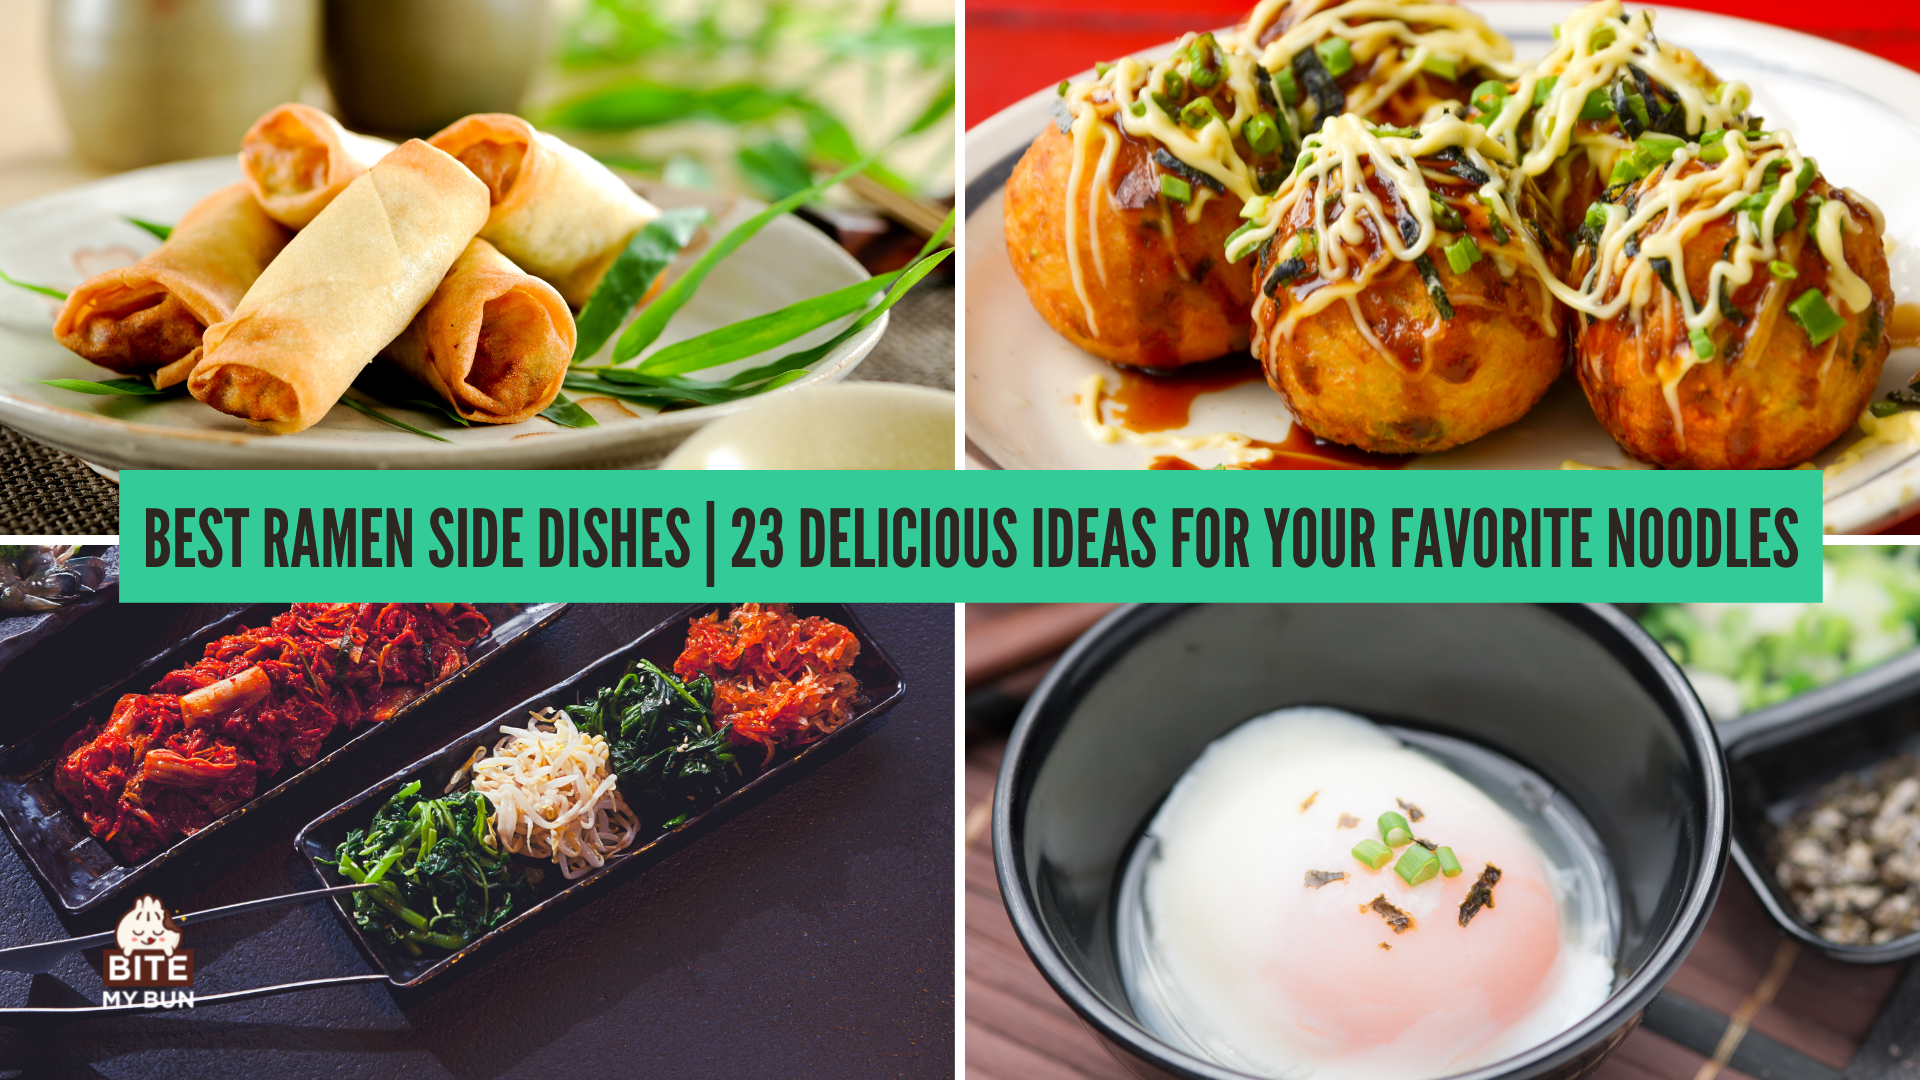 Best ramen side dishes | 23 delicious ideas for your favorite noodles